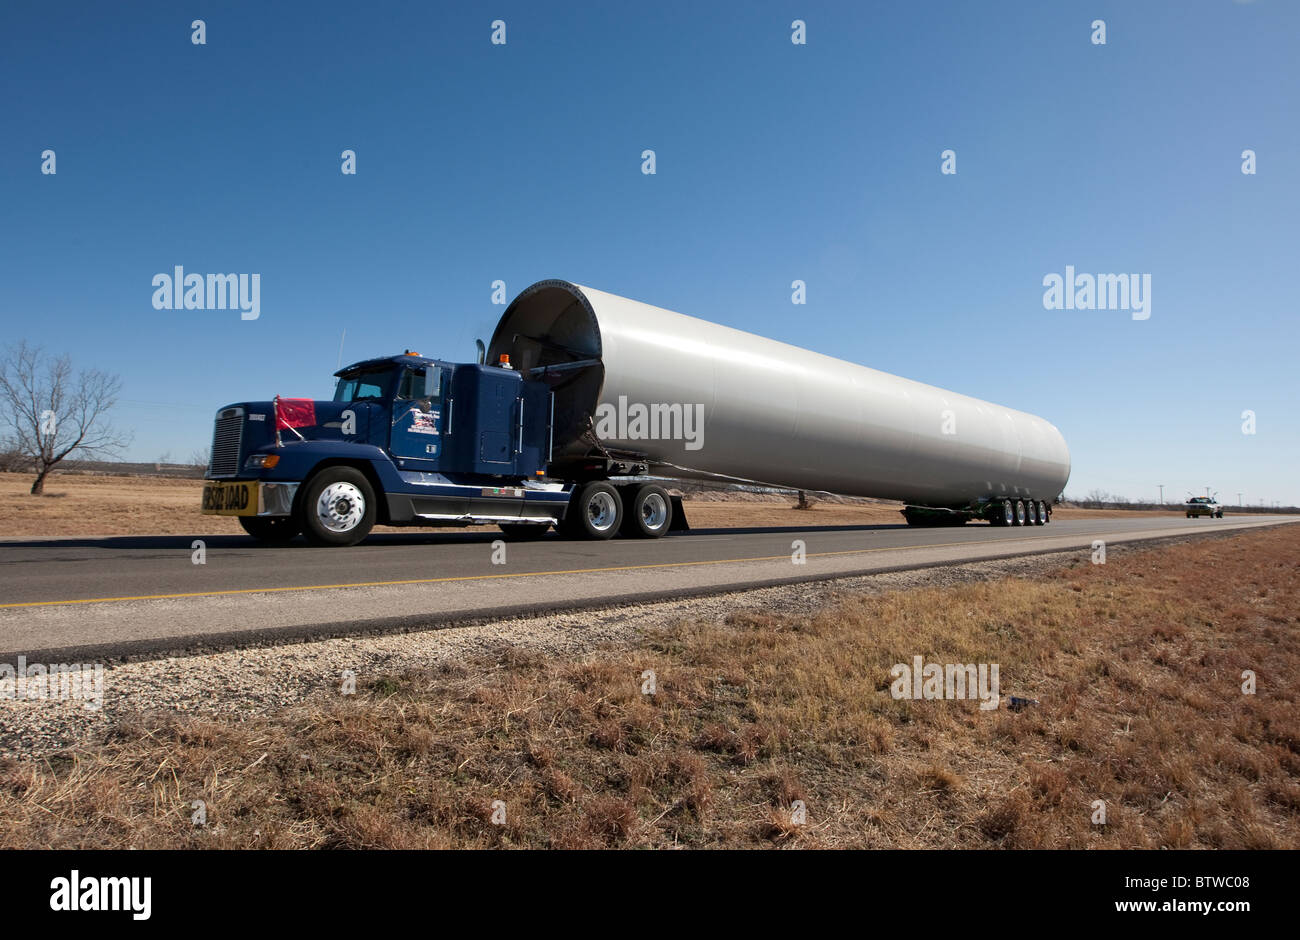 Tractor-trailer truck in a rural area near San Angelo TX hauls component of a high-tech windmill to a wind farm in West Texas. Stock Photo